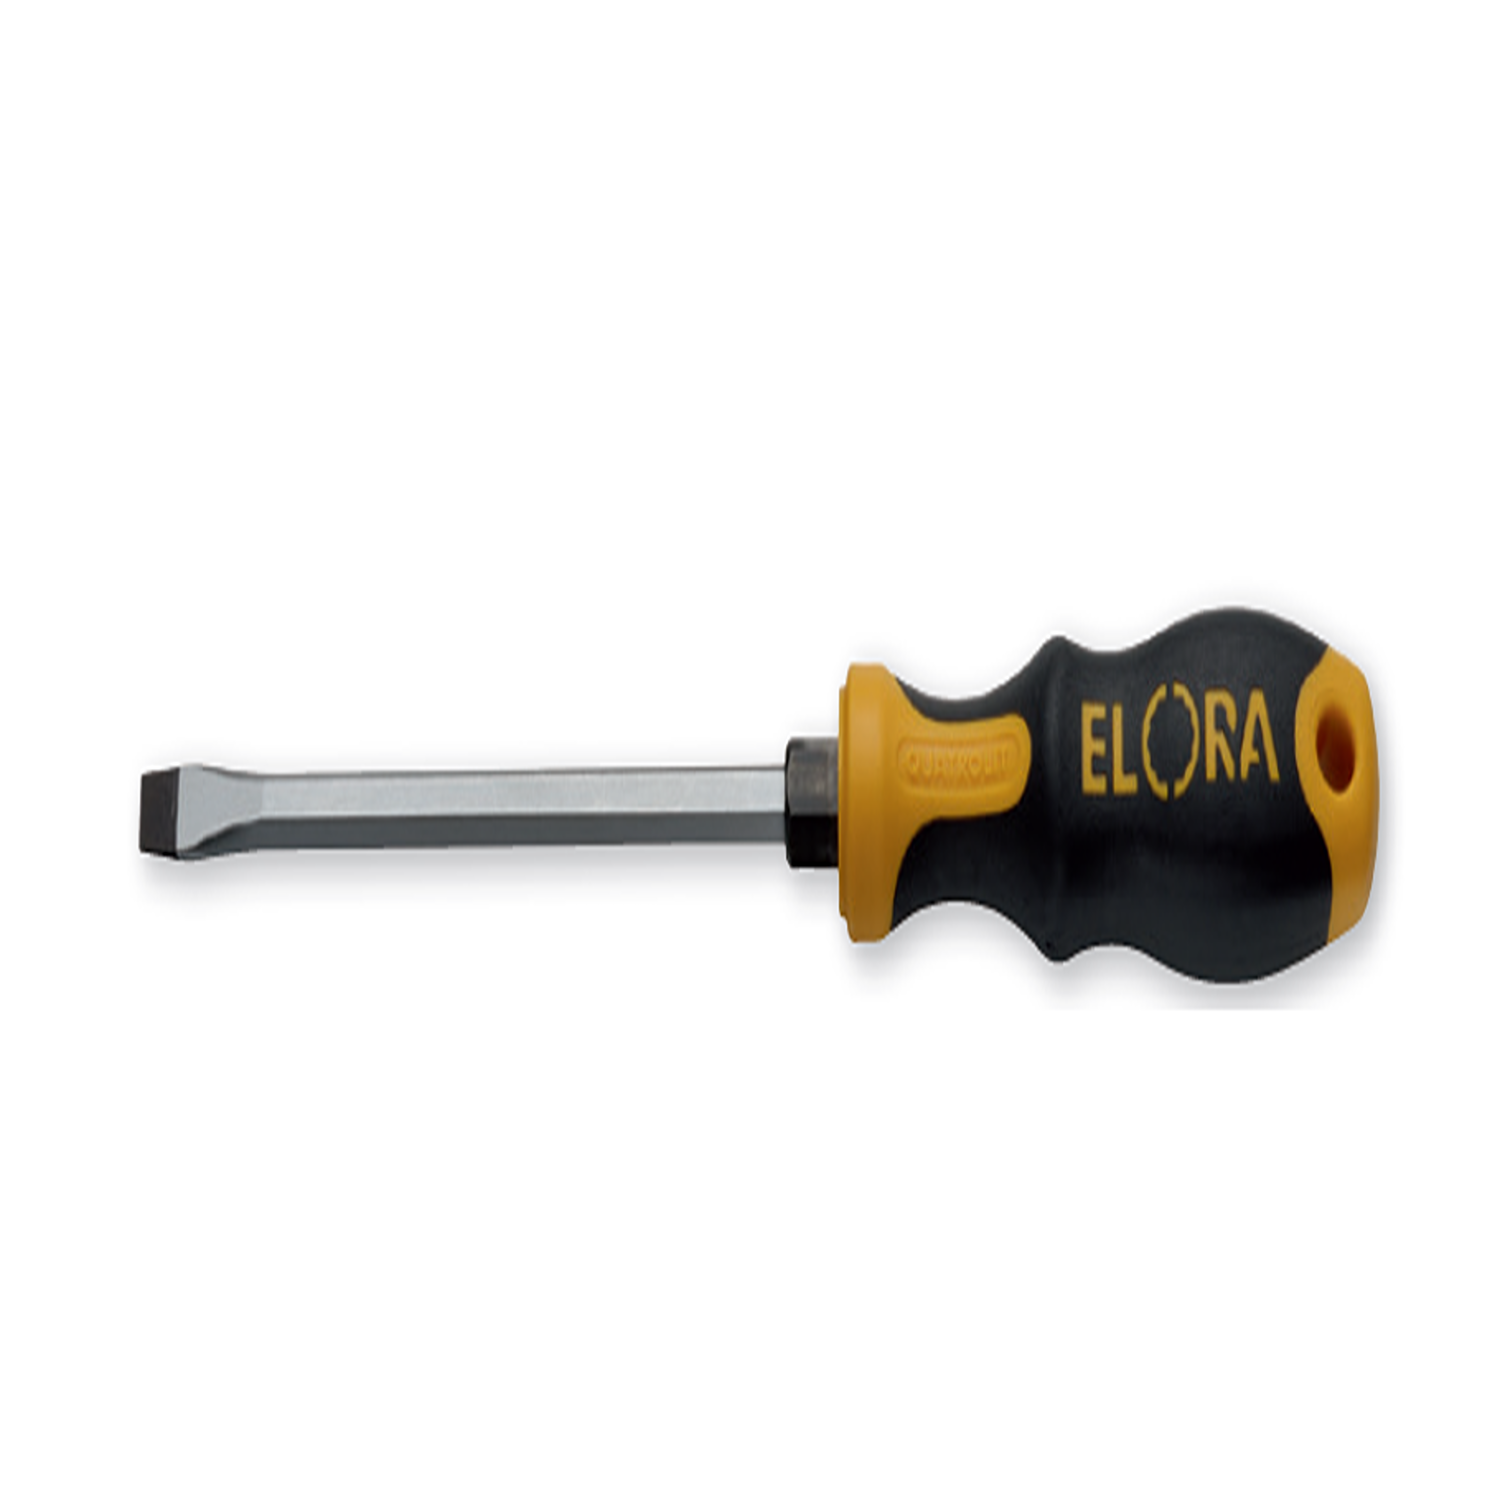 ELORA 539/1-IS Screwdriver with Hexagon Blade (ELORA Tools) - Premium Screwdriver from ELORA - Shop now at Yew Aik.